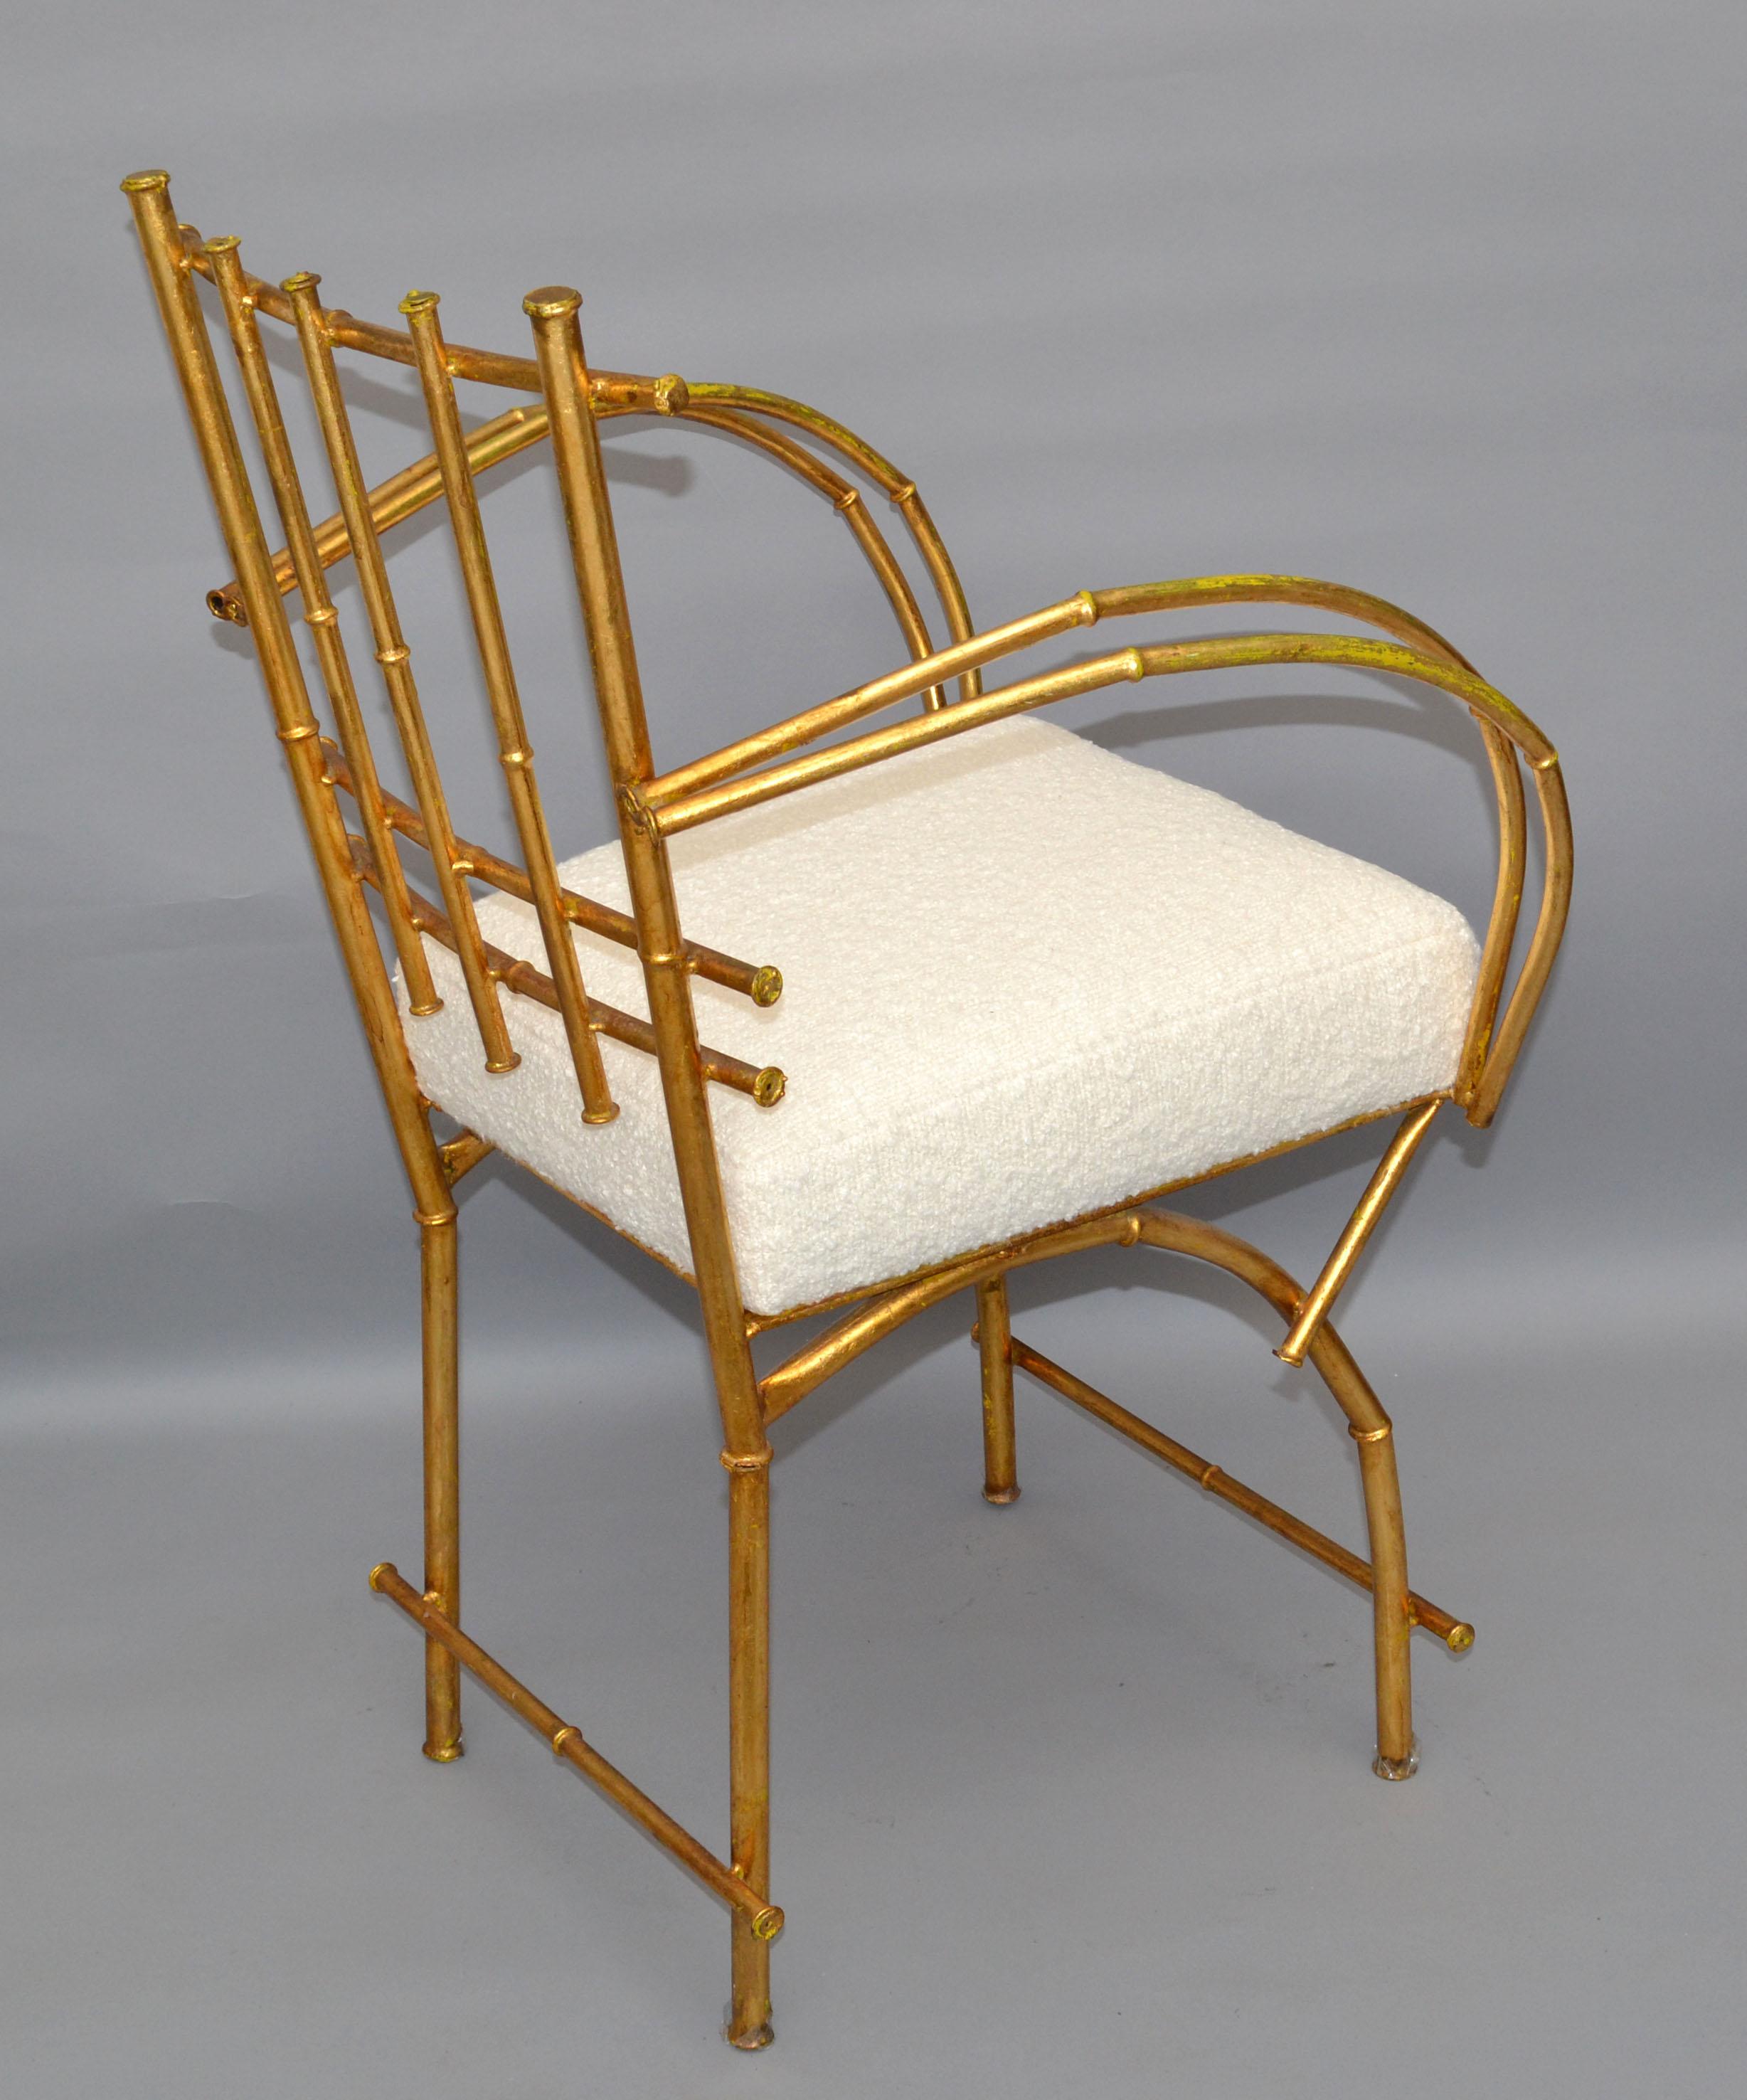 50s American Gilt Faux Bamboo Metal Arm / Vanity Chair Hollywood Regency Bouclé  In Good Condition For Sale In Miami, FL